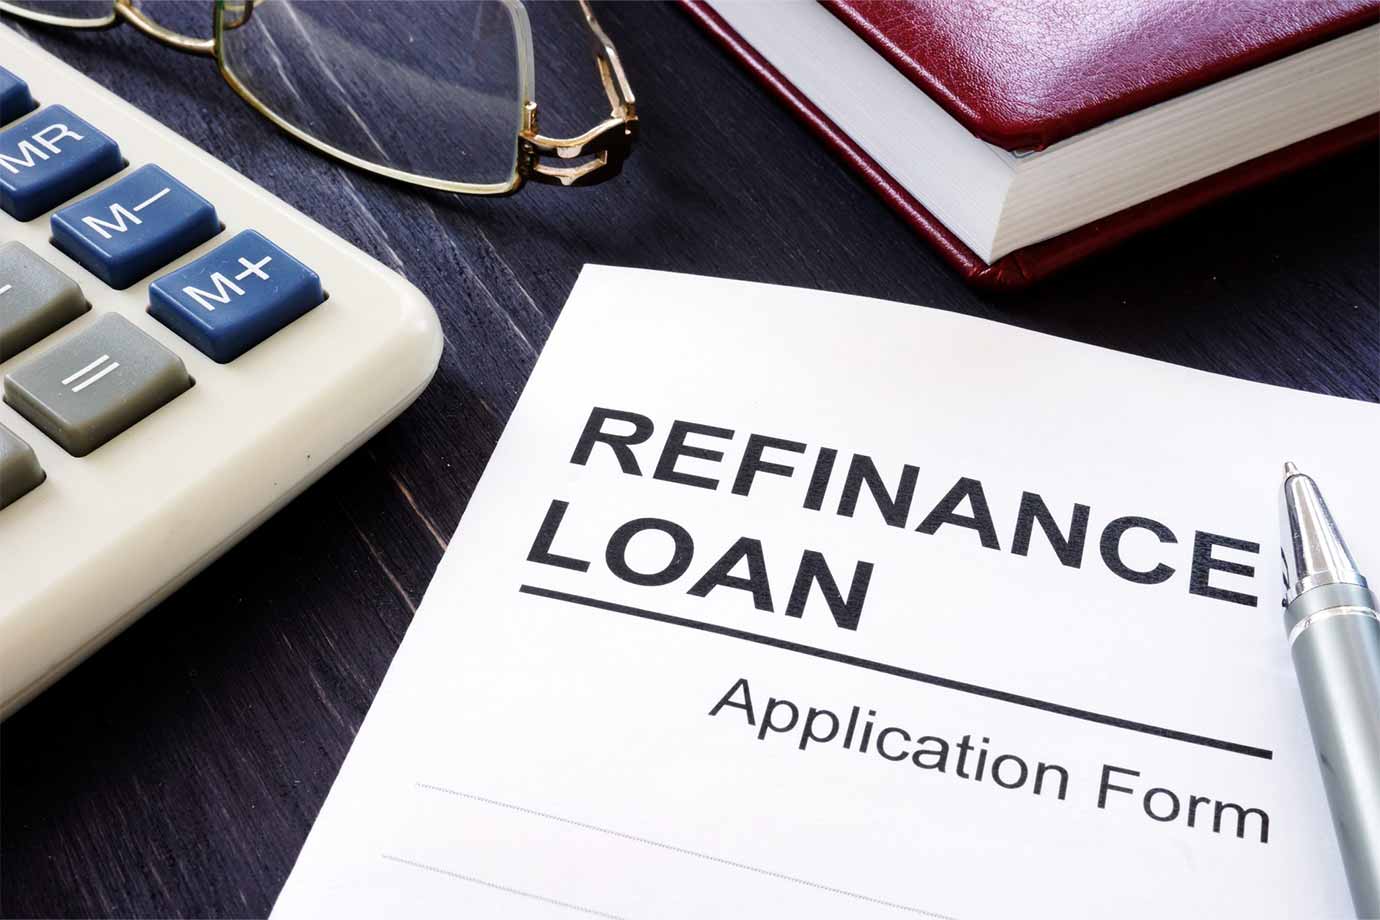 How to Refinance a Personal Loan?